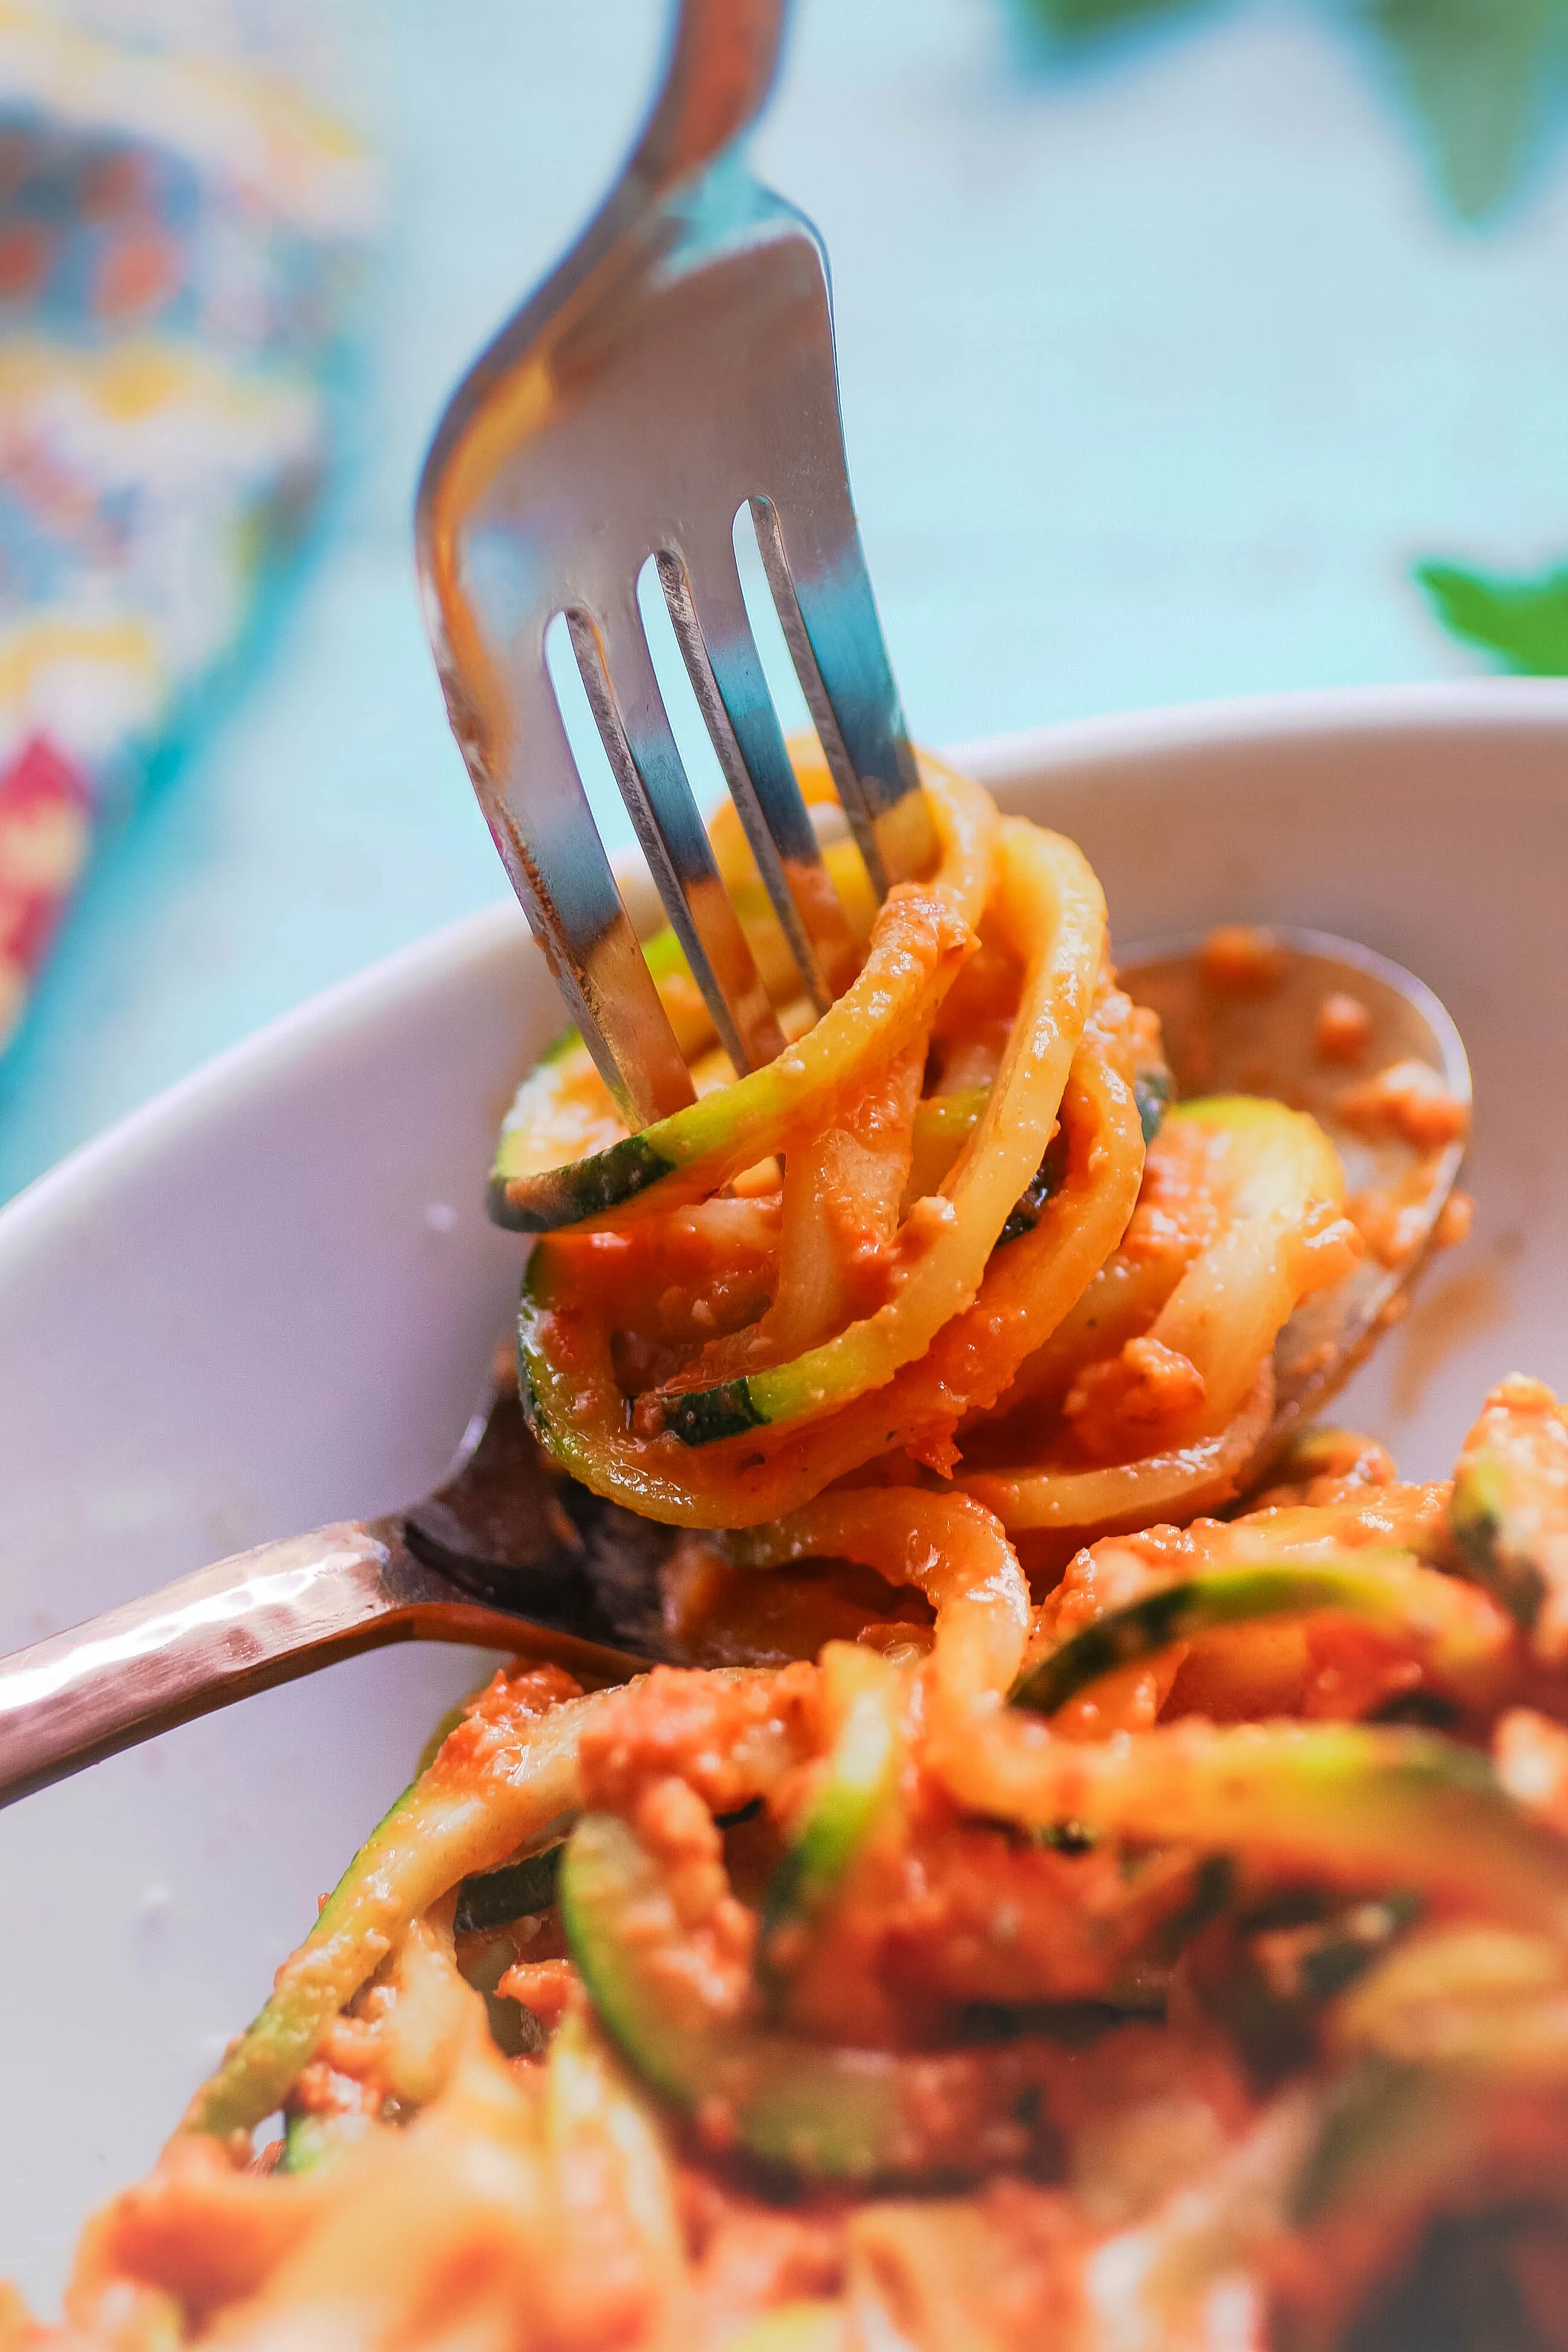 Low carb zoodles with Romesco sauce is easy to twirl up and enjoy. Low carb zoodles with Romesco sauce is a healthy dish you'll love.